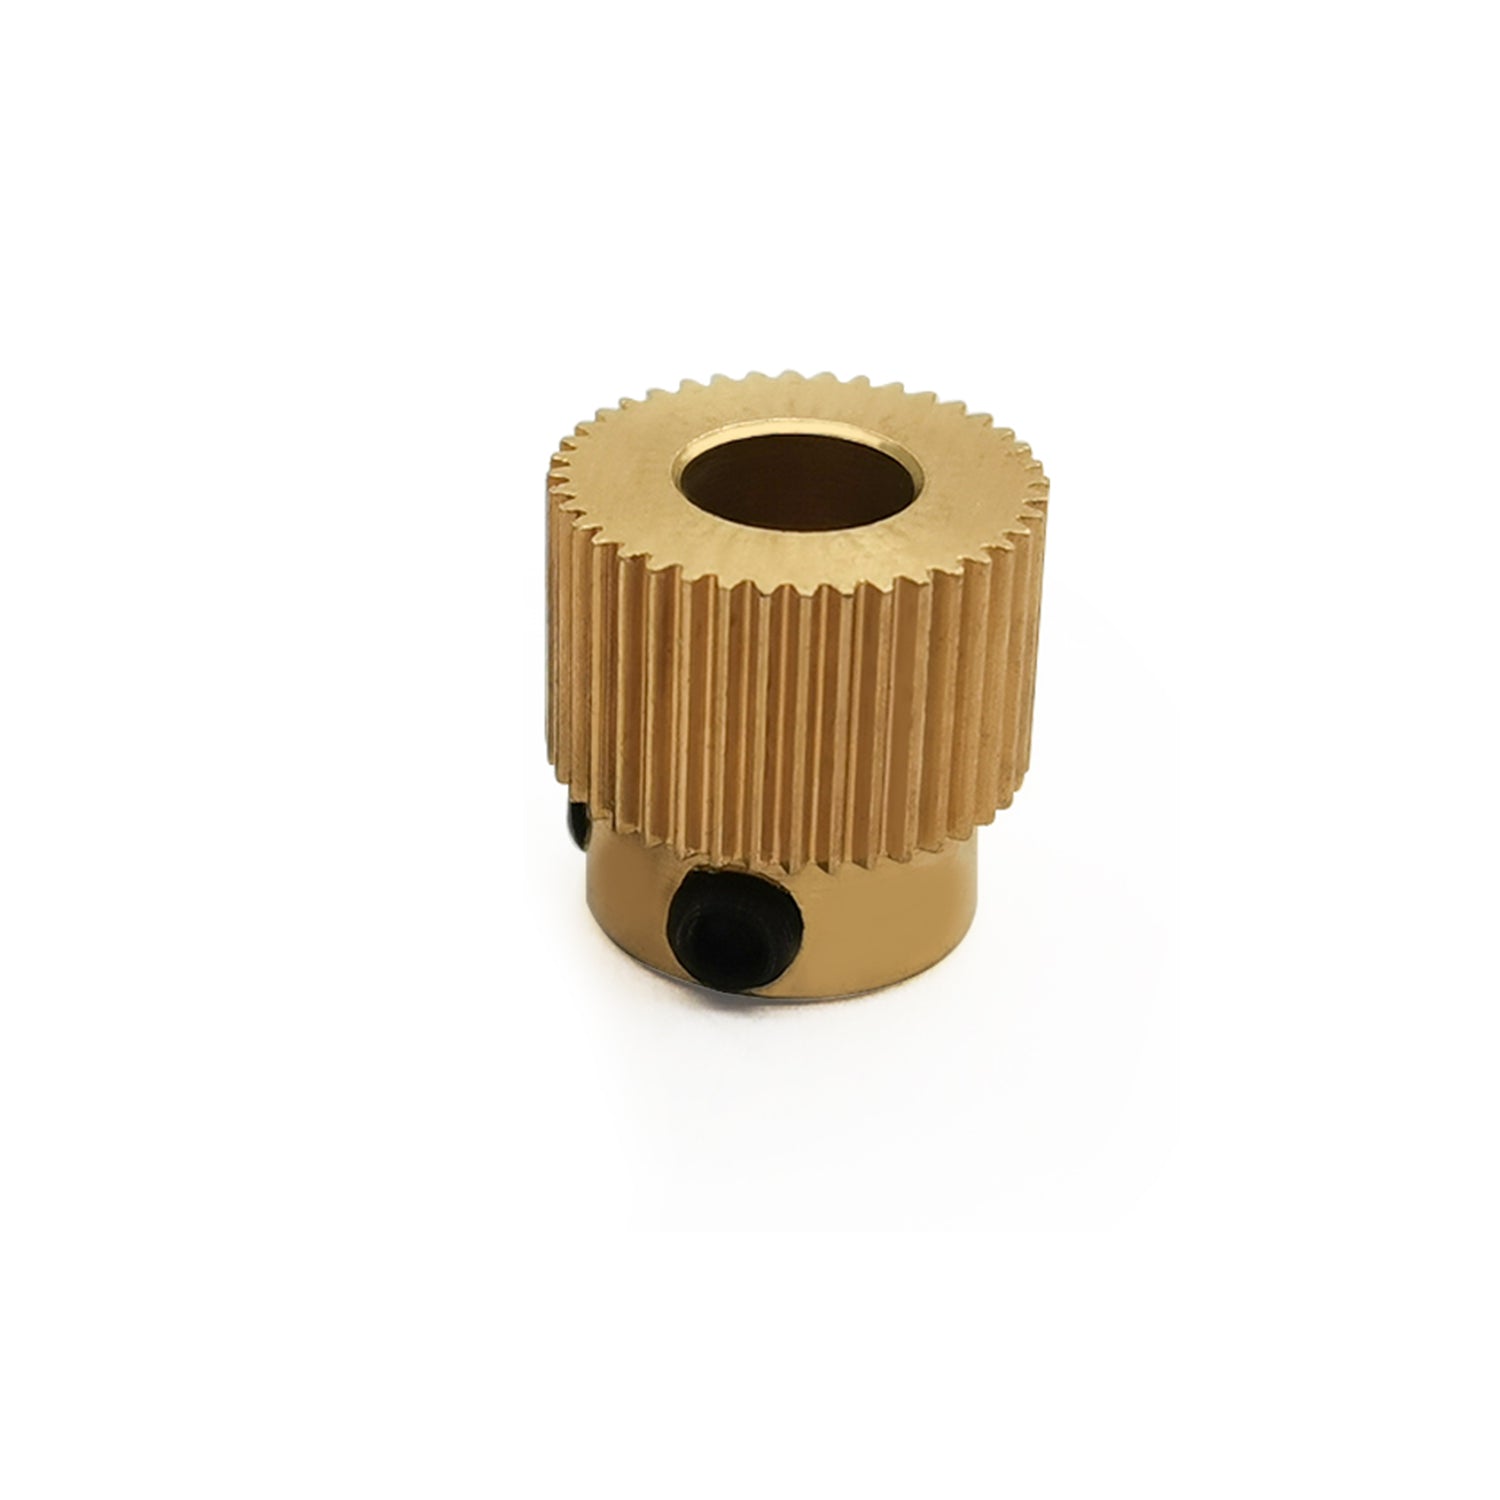 1pc Brass Extruder Pulley 40 Teeth 5mm Bore 11mm Outside Diameter Compatible with Creality Ender 3/3S/V2/5, CR10/10S/V2 for 3D Printer